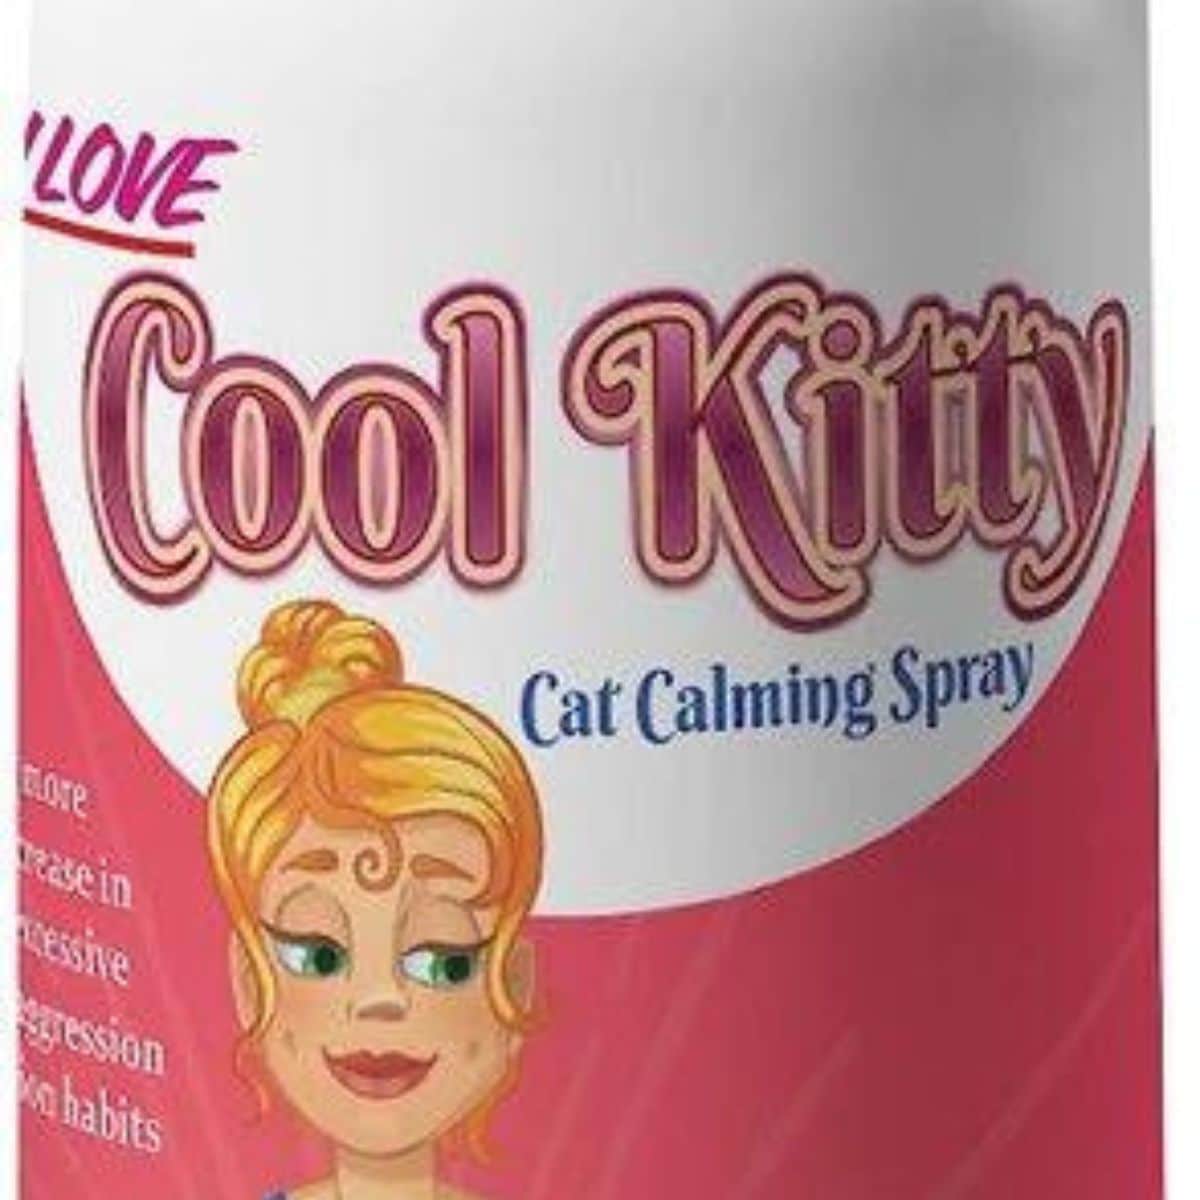 Pet MasterMind Cool Kitty Calming Spray for Cats